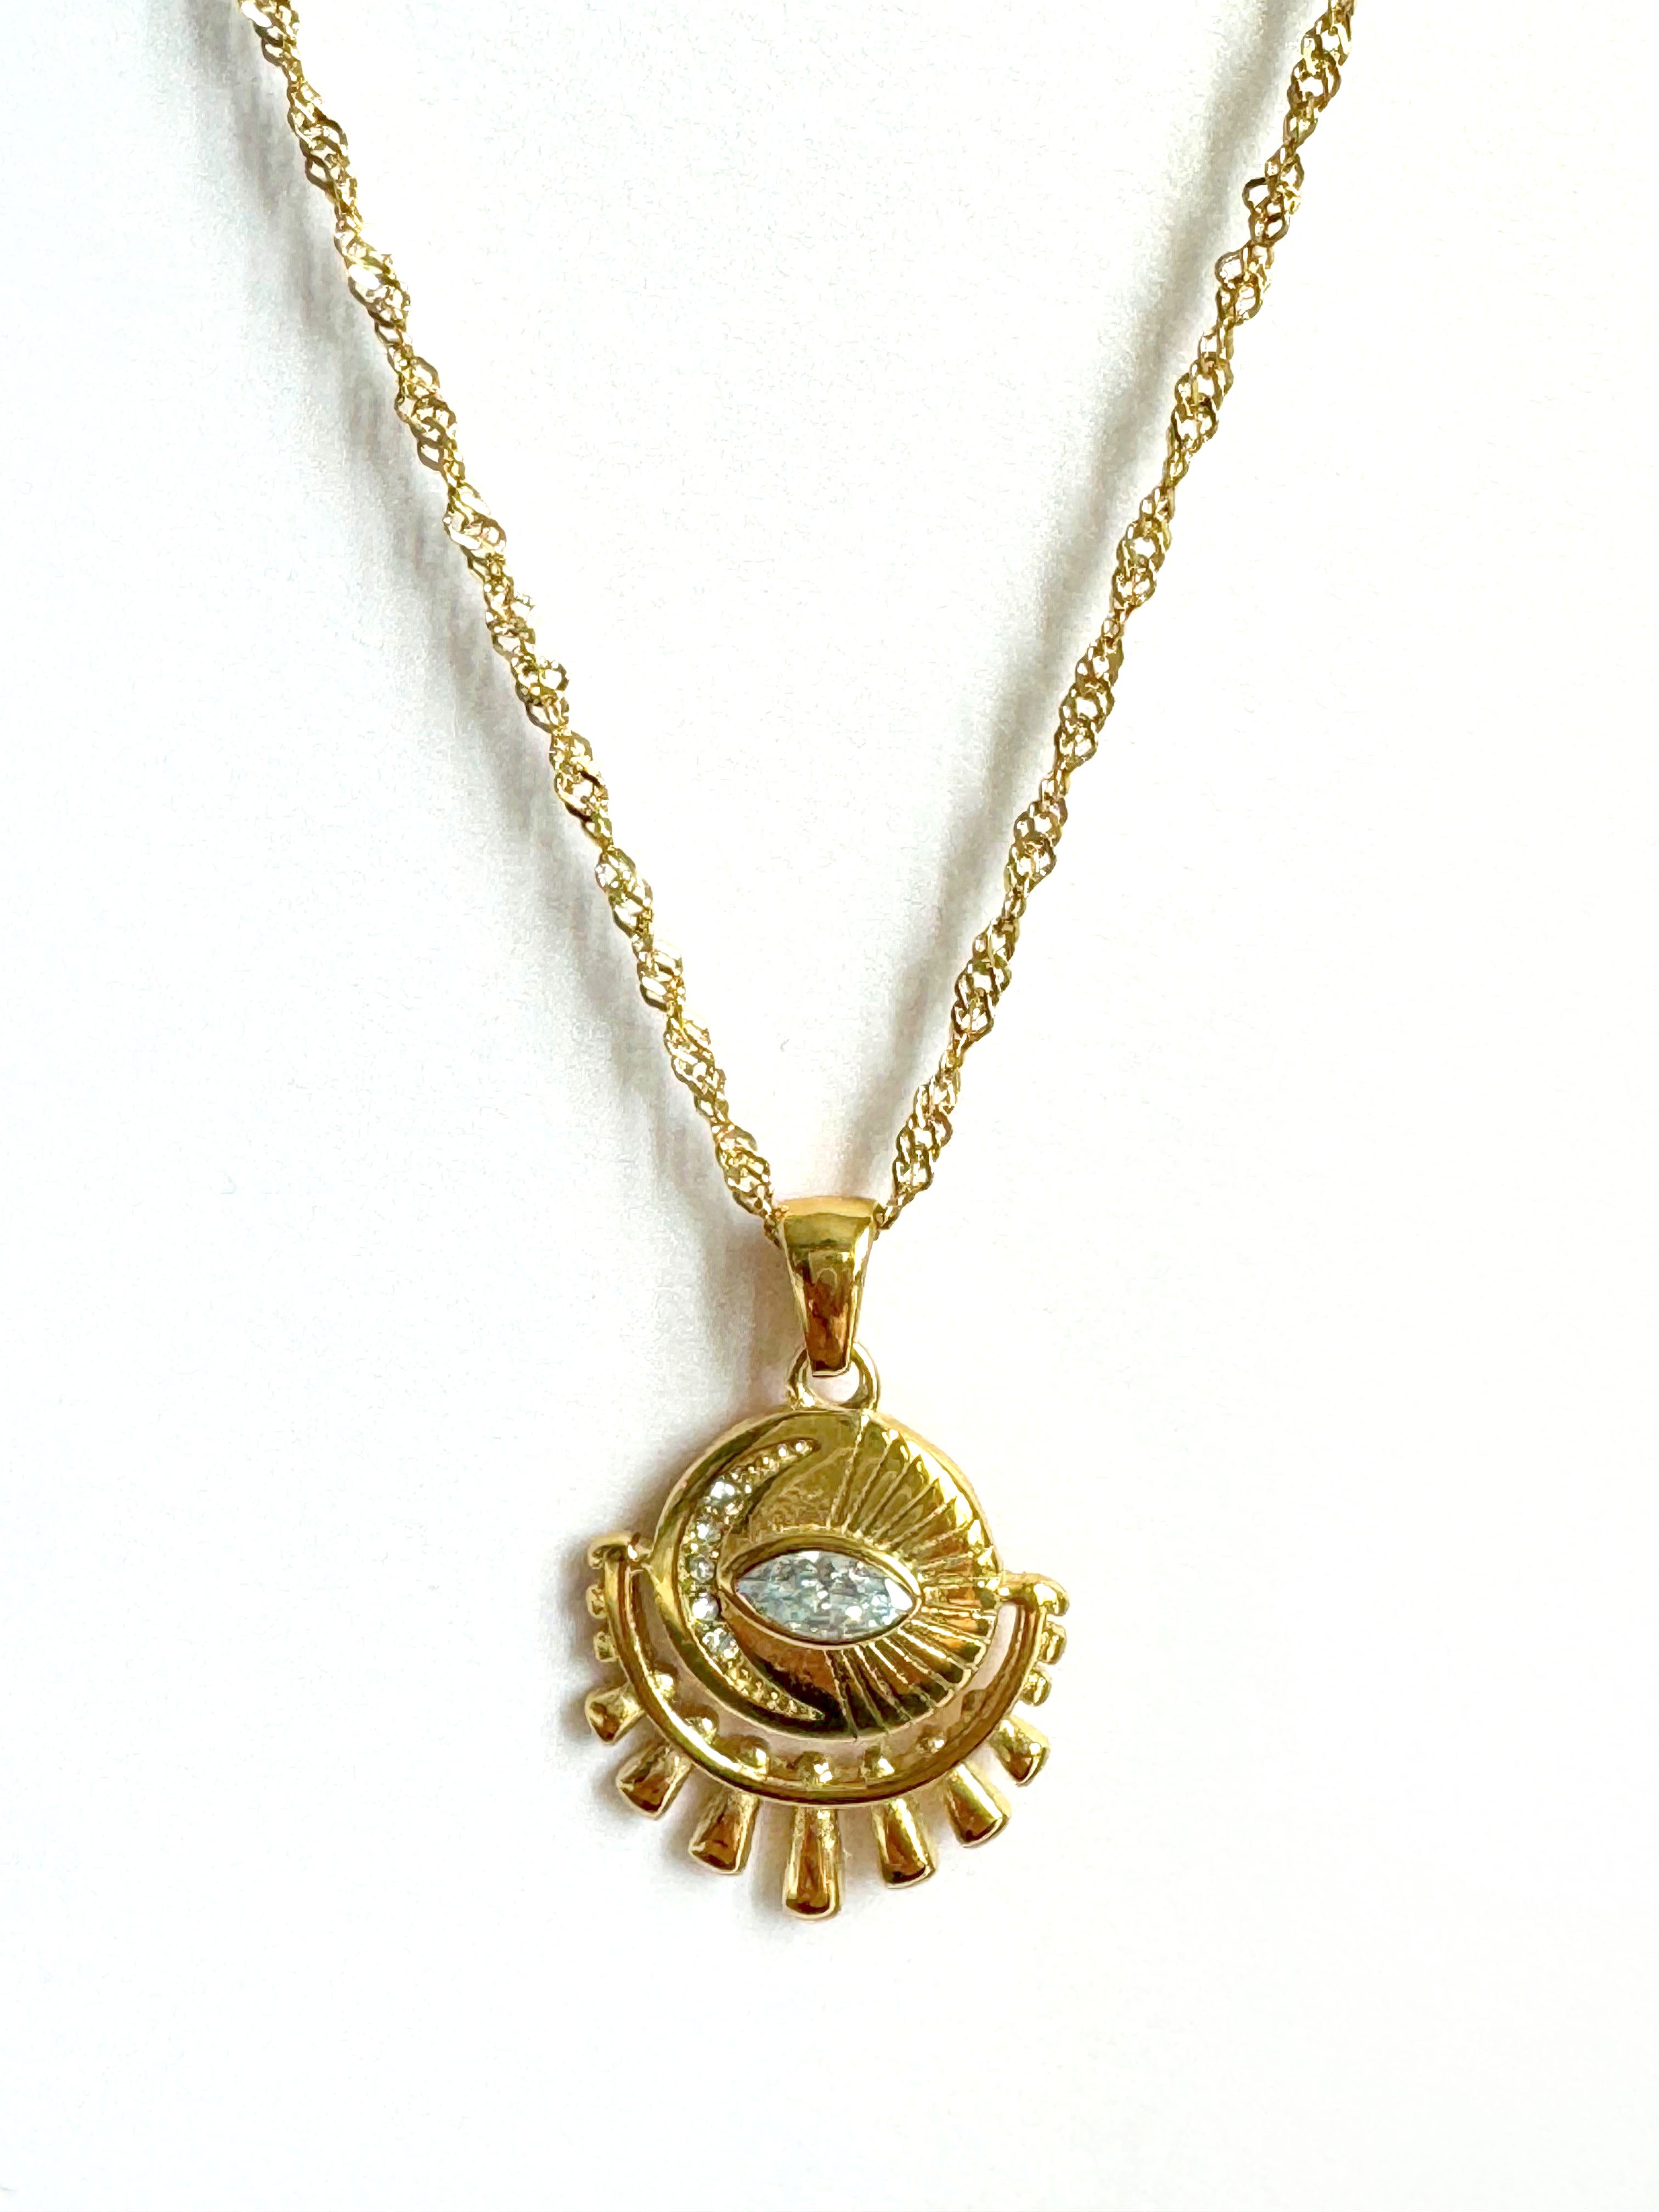 Layla Luxe 18k Gold Plated Evil Eye Necklace